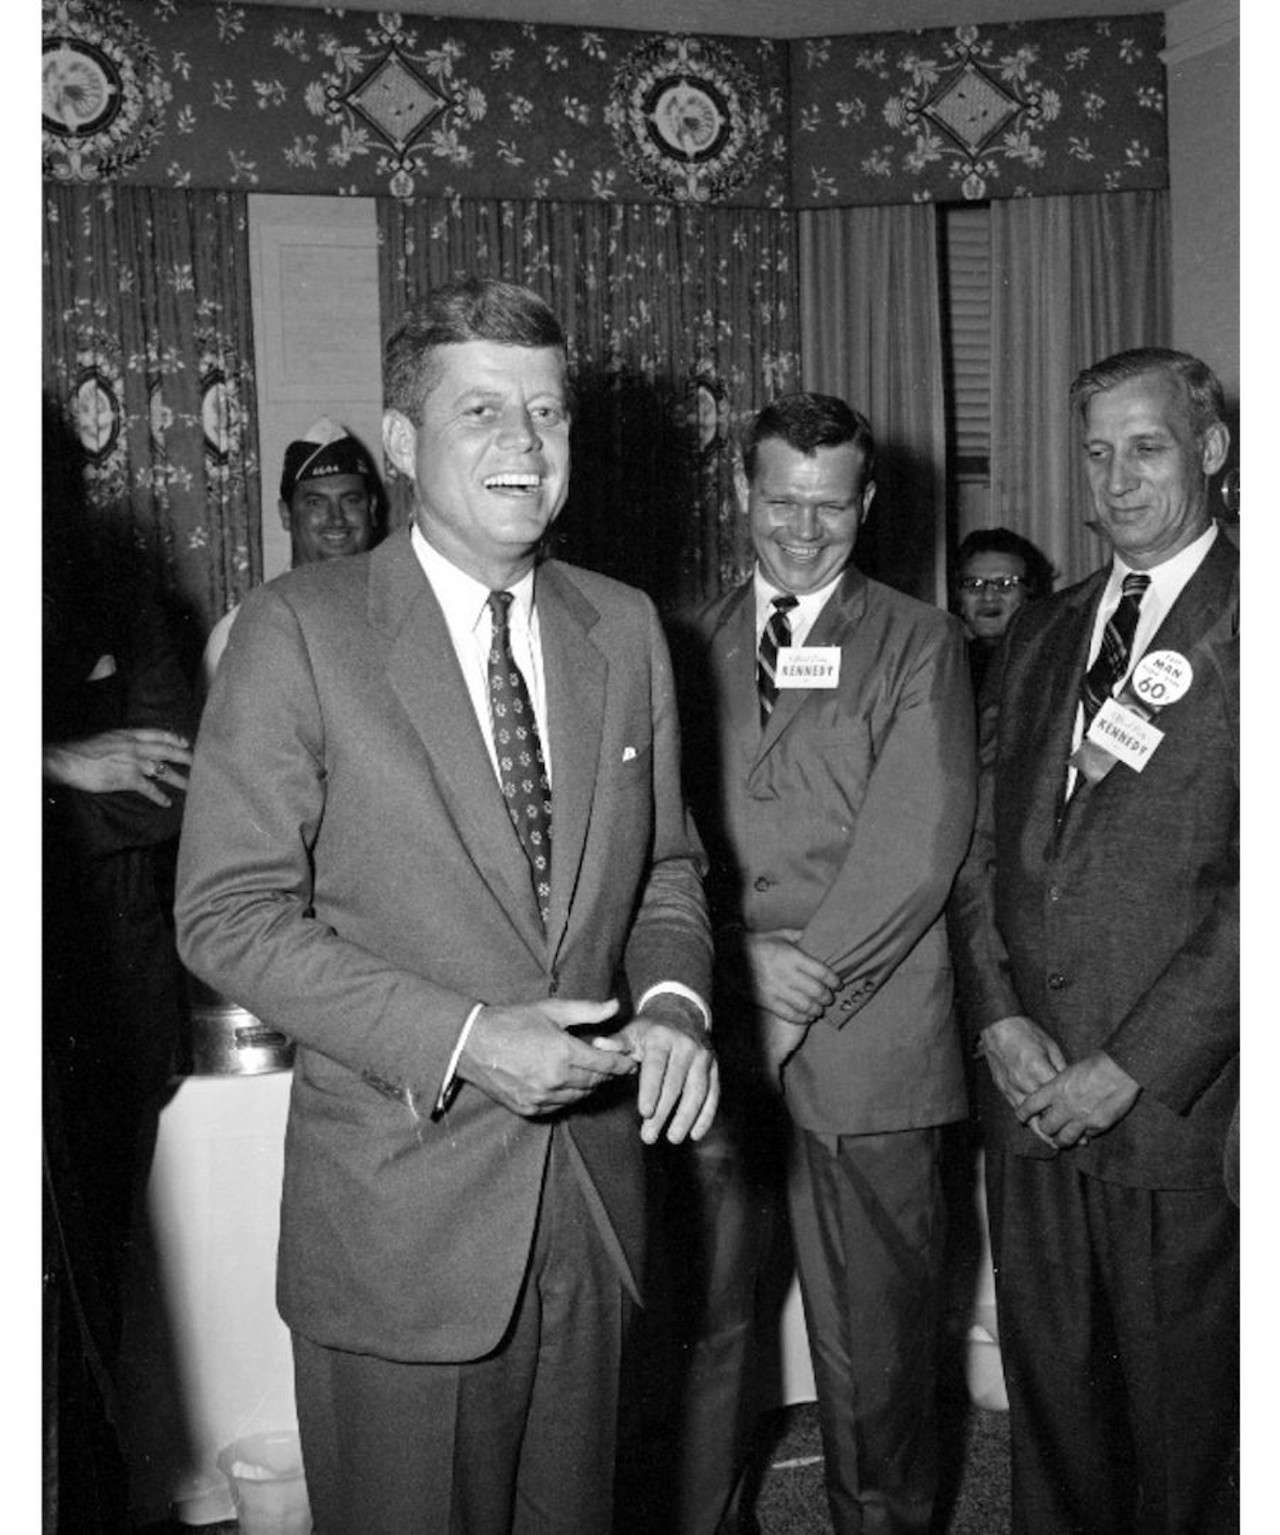 John F. Kennedy in Detroit.
Presidential candidate John F. Kennedy (left) with campaign supporters in Detroit (Michigan lieutenant governor and gubernatorial candidate John B. Swainson is on his left).
All photos courtesy of Walter P. Reuther Library, Archives of Labor and Urban Affairs, Wayne State University